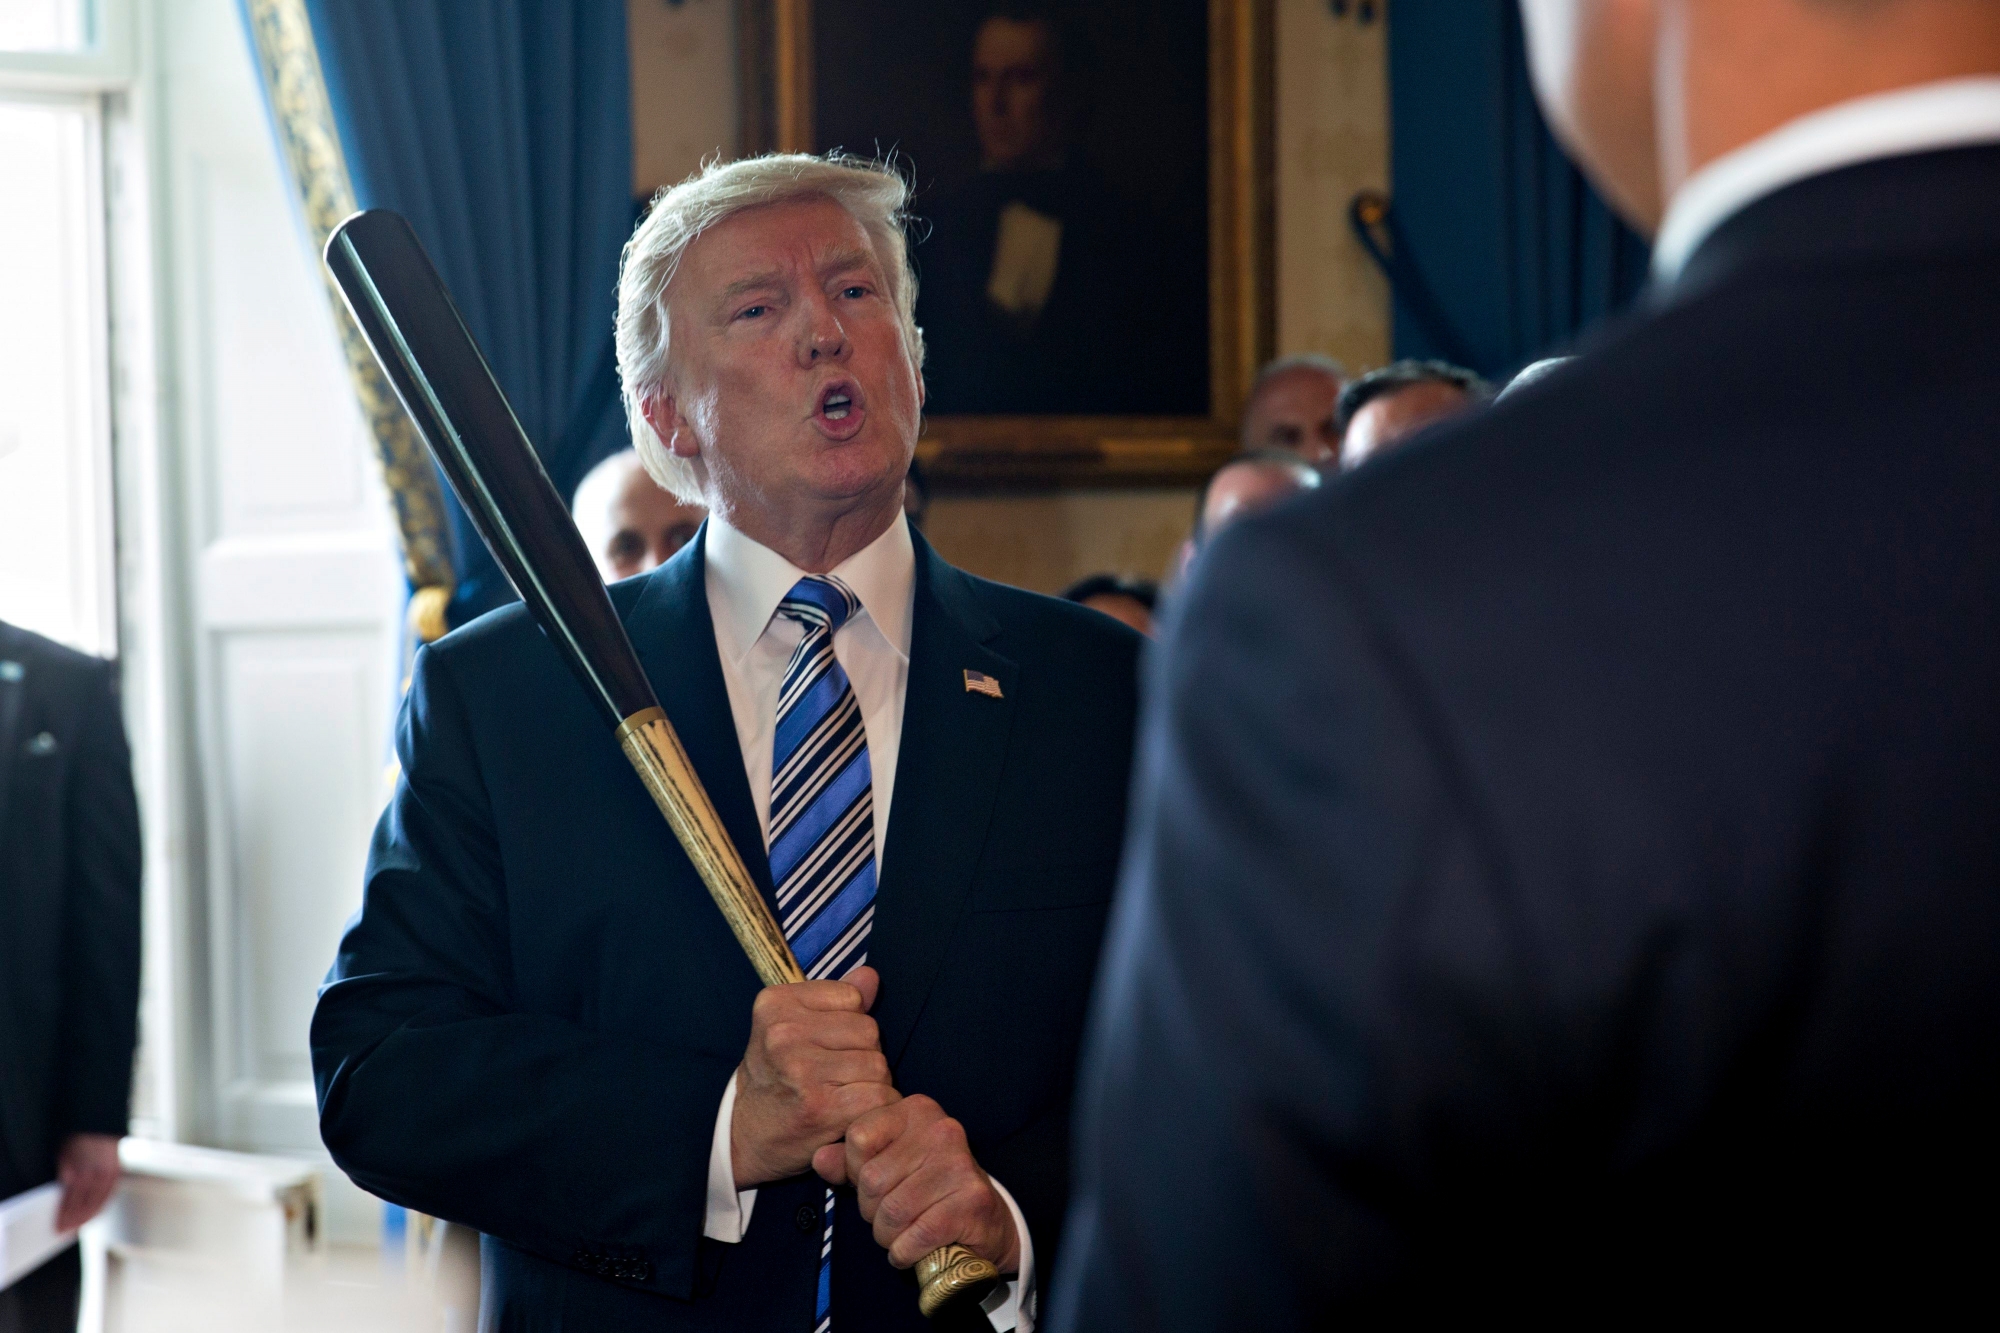 epa06093584 US President Donald J. Trump holds a baseball bat while participating in a Made in America event with companies from 50 states featuring their products in the Blue Room of the White House in Washington, DC, USA, 17 July 2017. US President Donald J. Trump participated at the White House in a showcase of products 'Made in America', which featured 50 products from the 50 states of the nation. Trump signed a presidential proclamation in the East Room making 17 July 'Made in America' Day and this week, 'Made in America' week.  EPA/Andrew Harrer / POOL USA TRUMP WHITE HOUSE MADE IN AMERICA